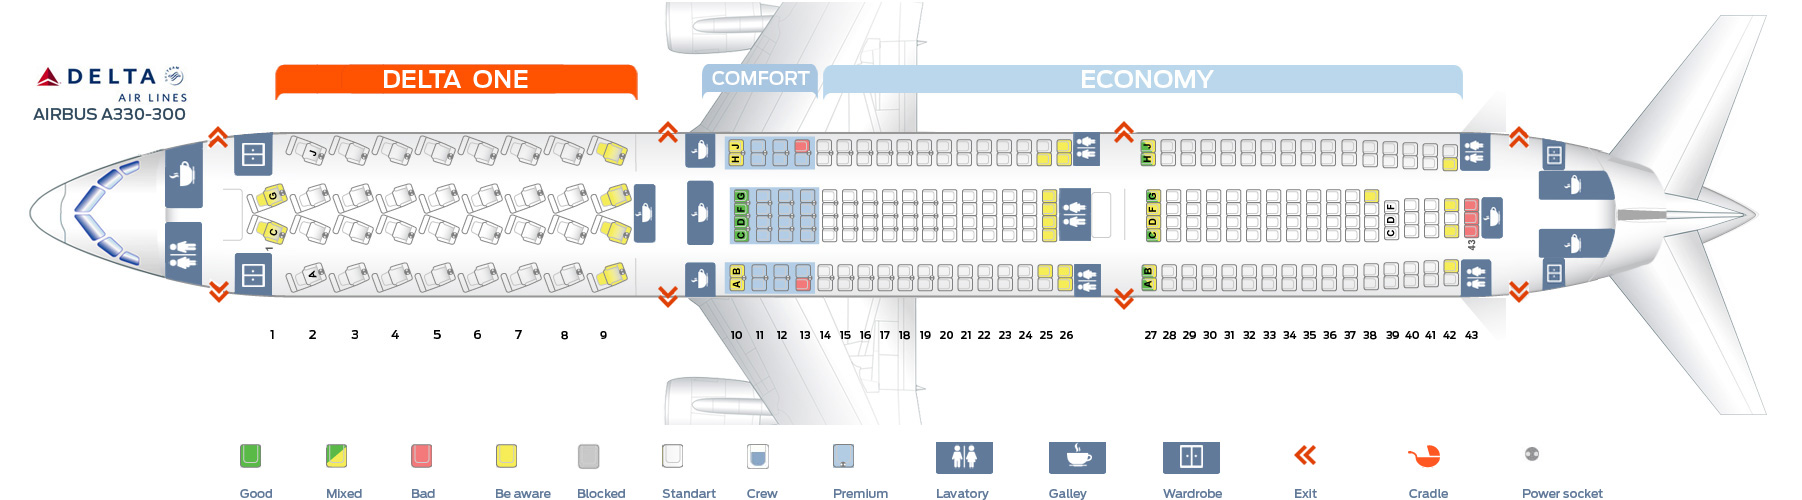 Seat map Airbus A330300 Delta Airlines. Best seats in plane